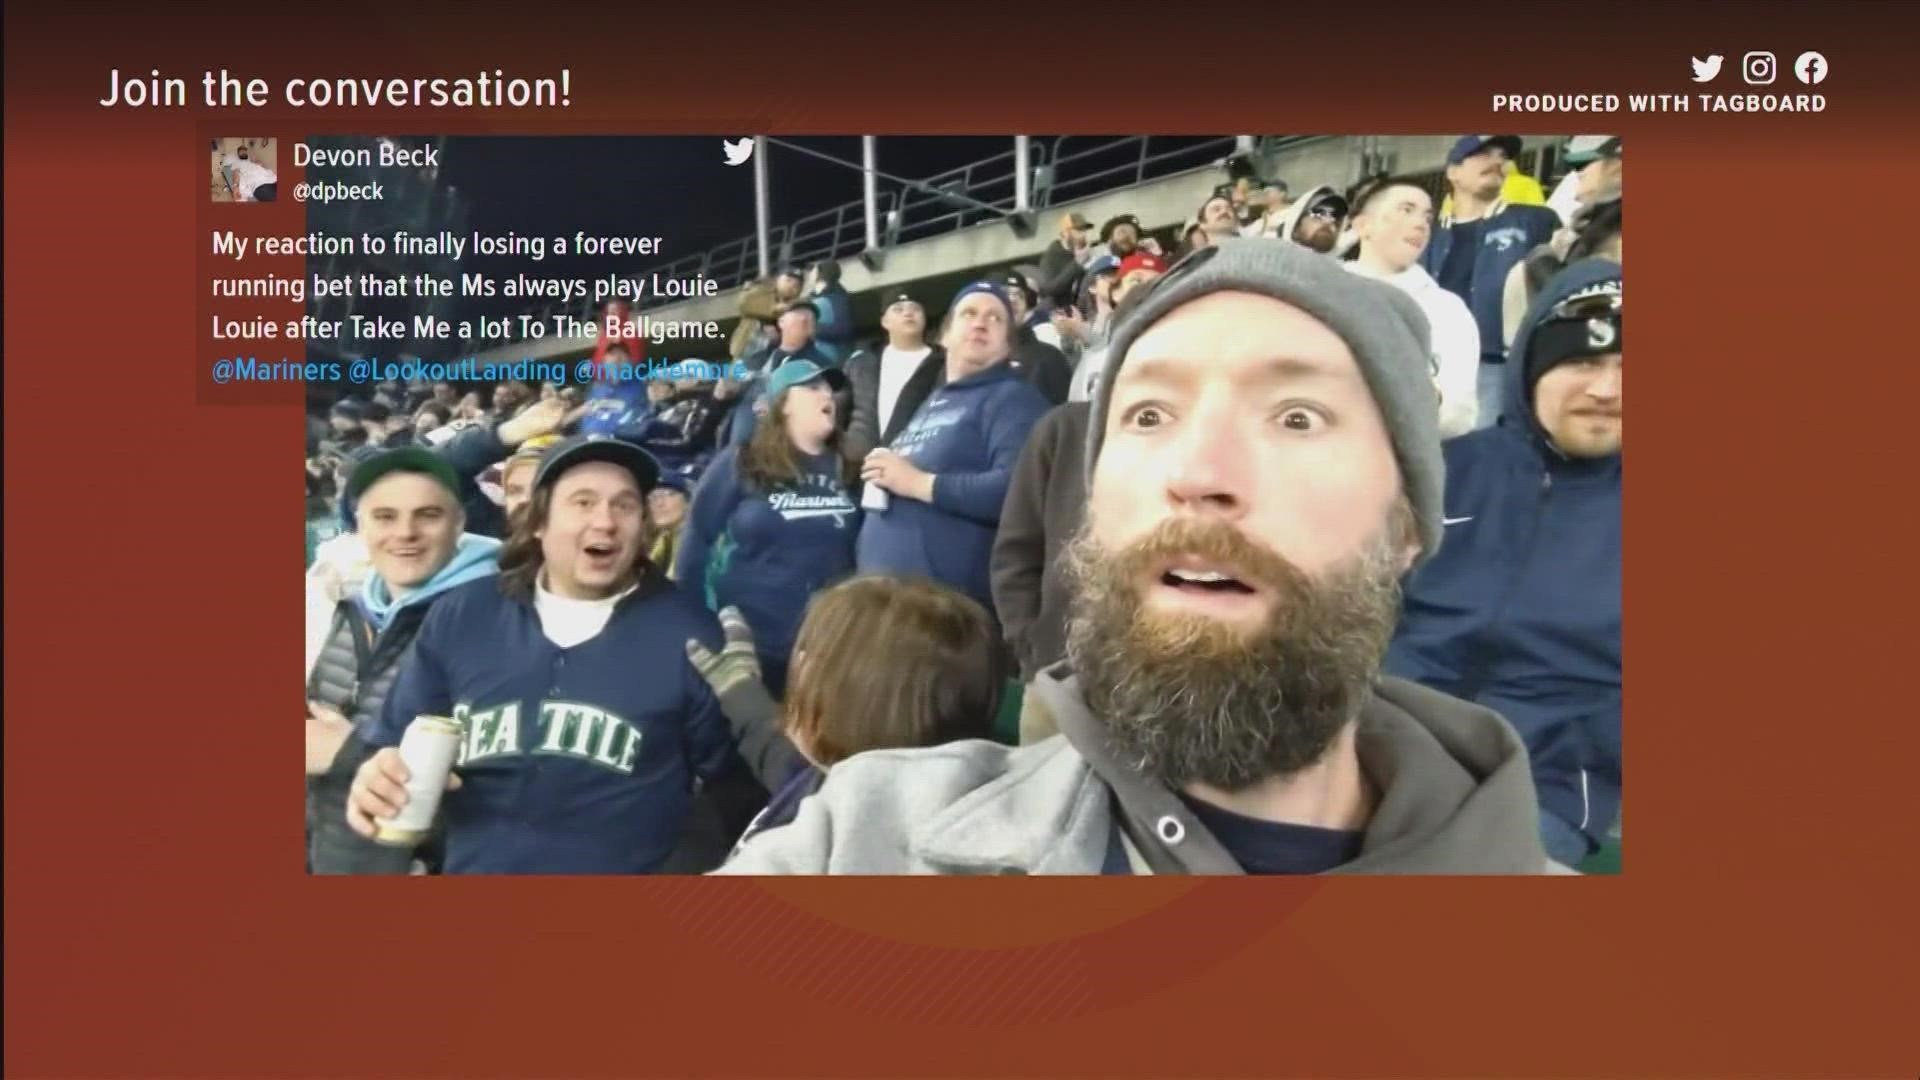 "Louie Louie" was an extremely popular 7th inning tradition for Mariners fans, but they will hear a different tune in 2022.